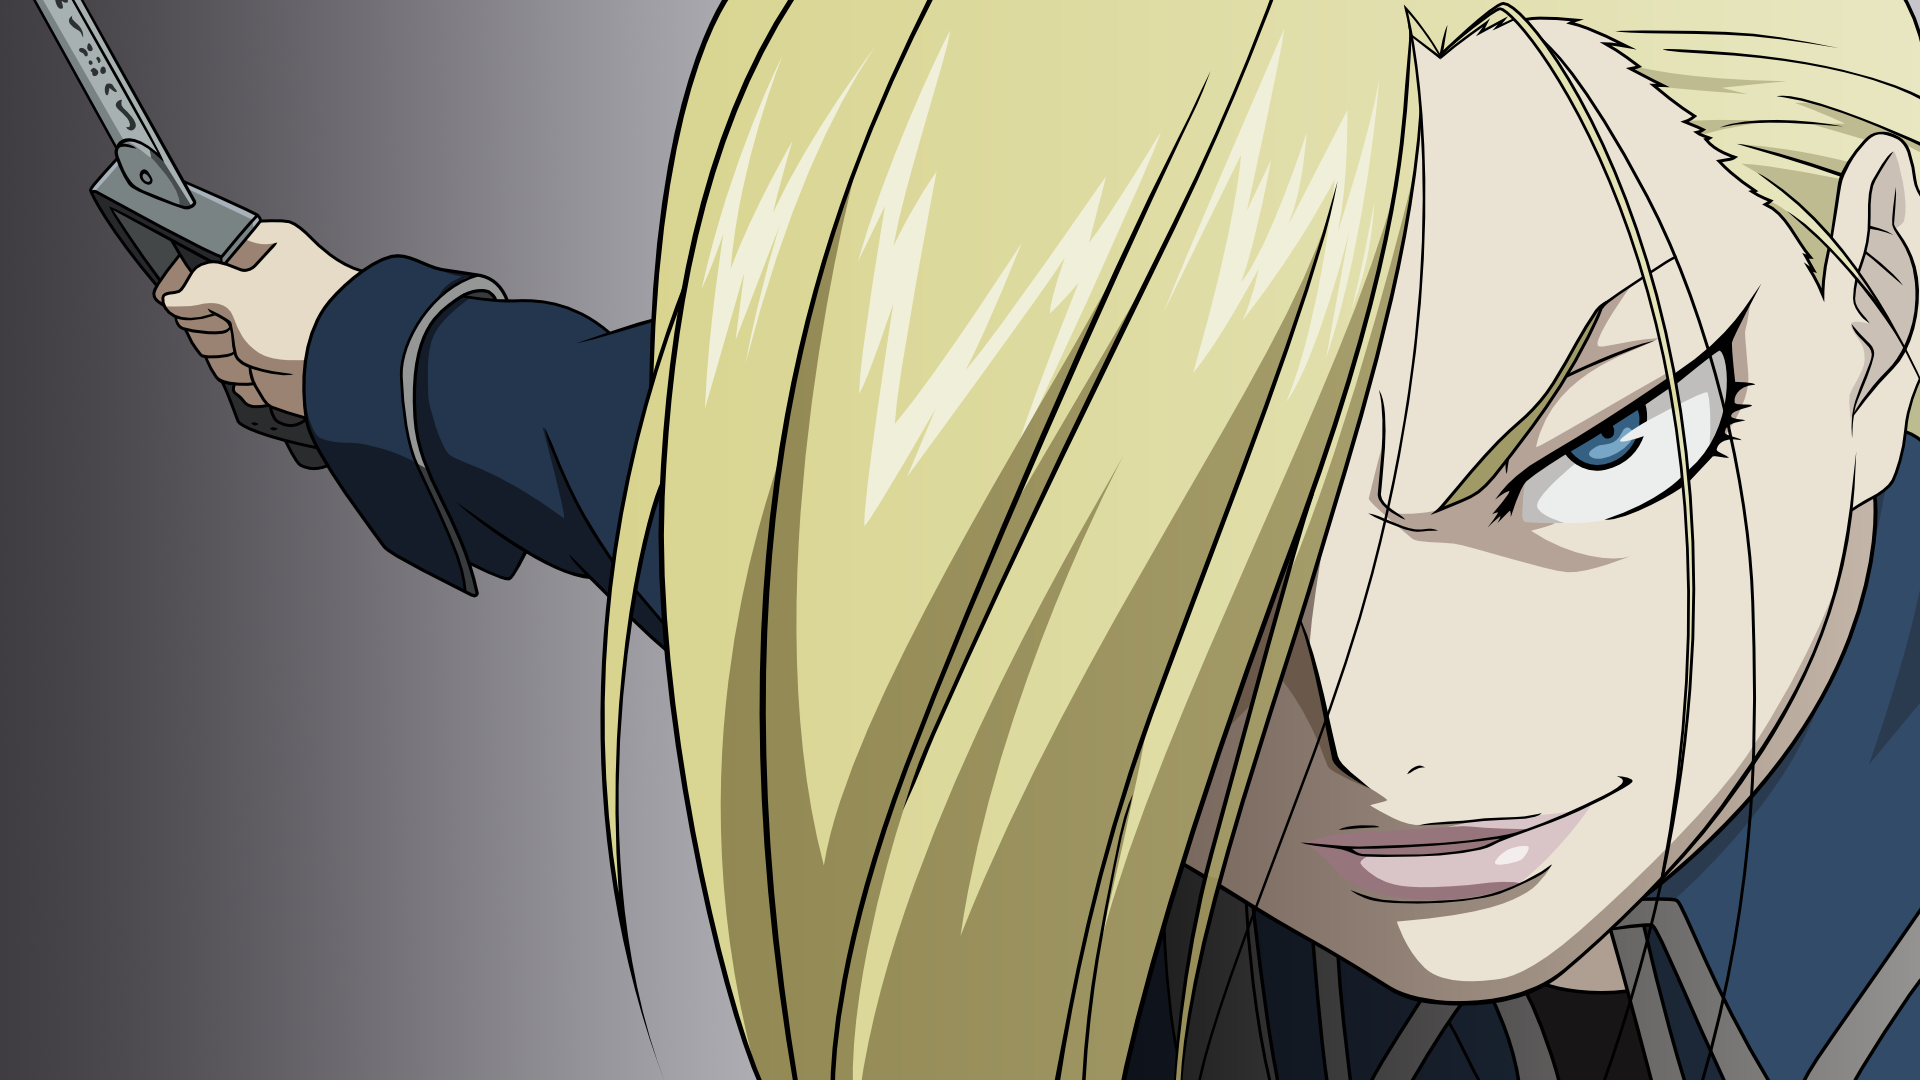 Anime 1920x1080 anime Full Metal Alchemist Olivier Milla Armstrong Olivier Mira Armstrong hair in face blue eyes